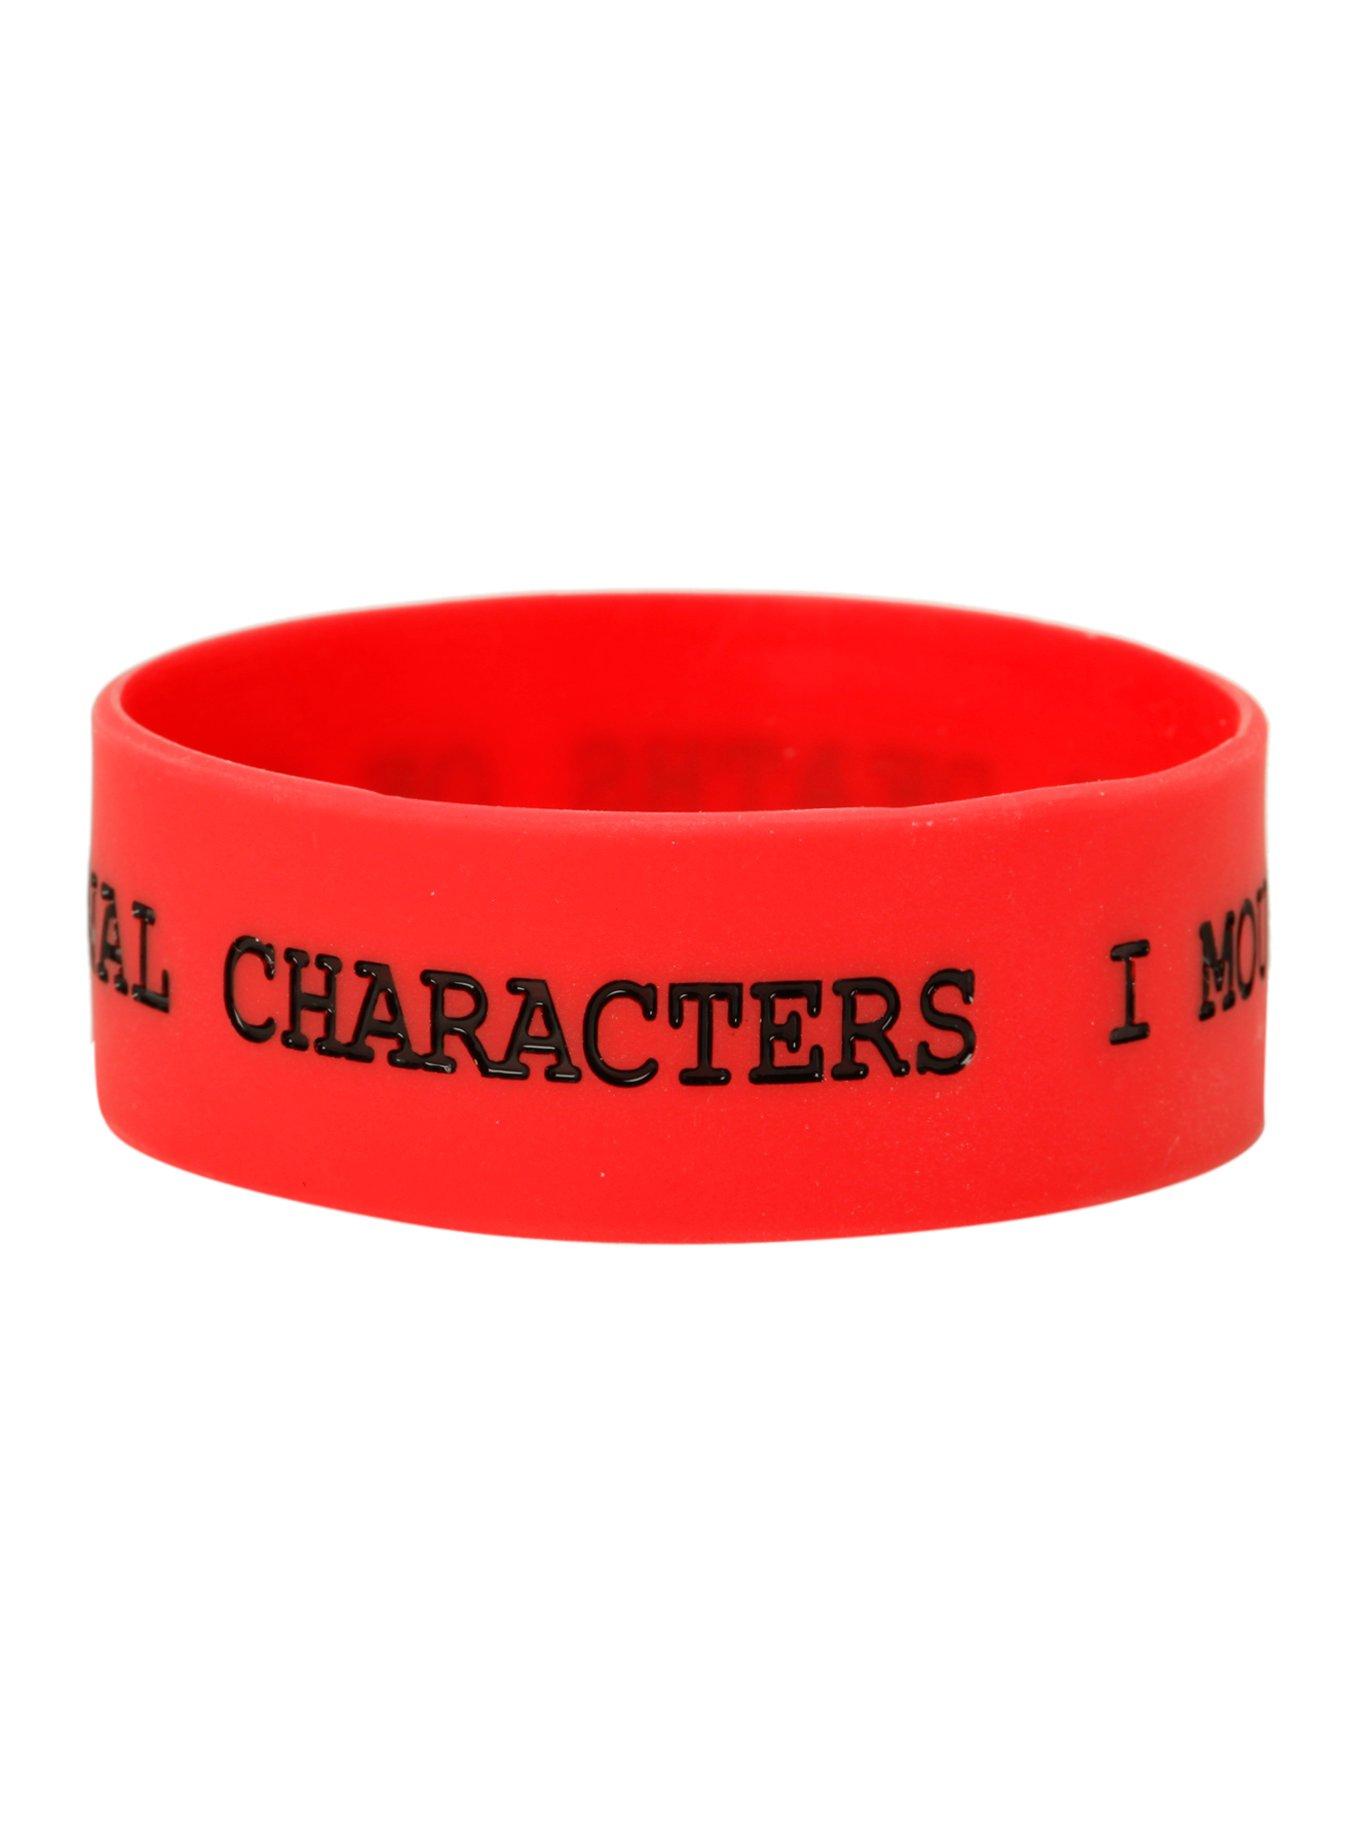 I Mourn The Deaths Of Fictional Characters Rubber Bracelet, , alternate